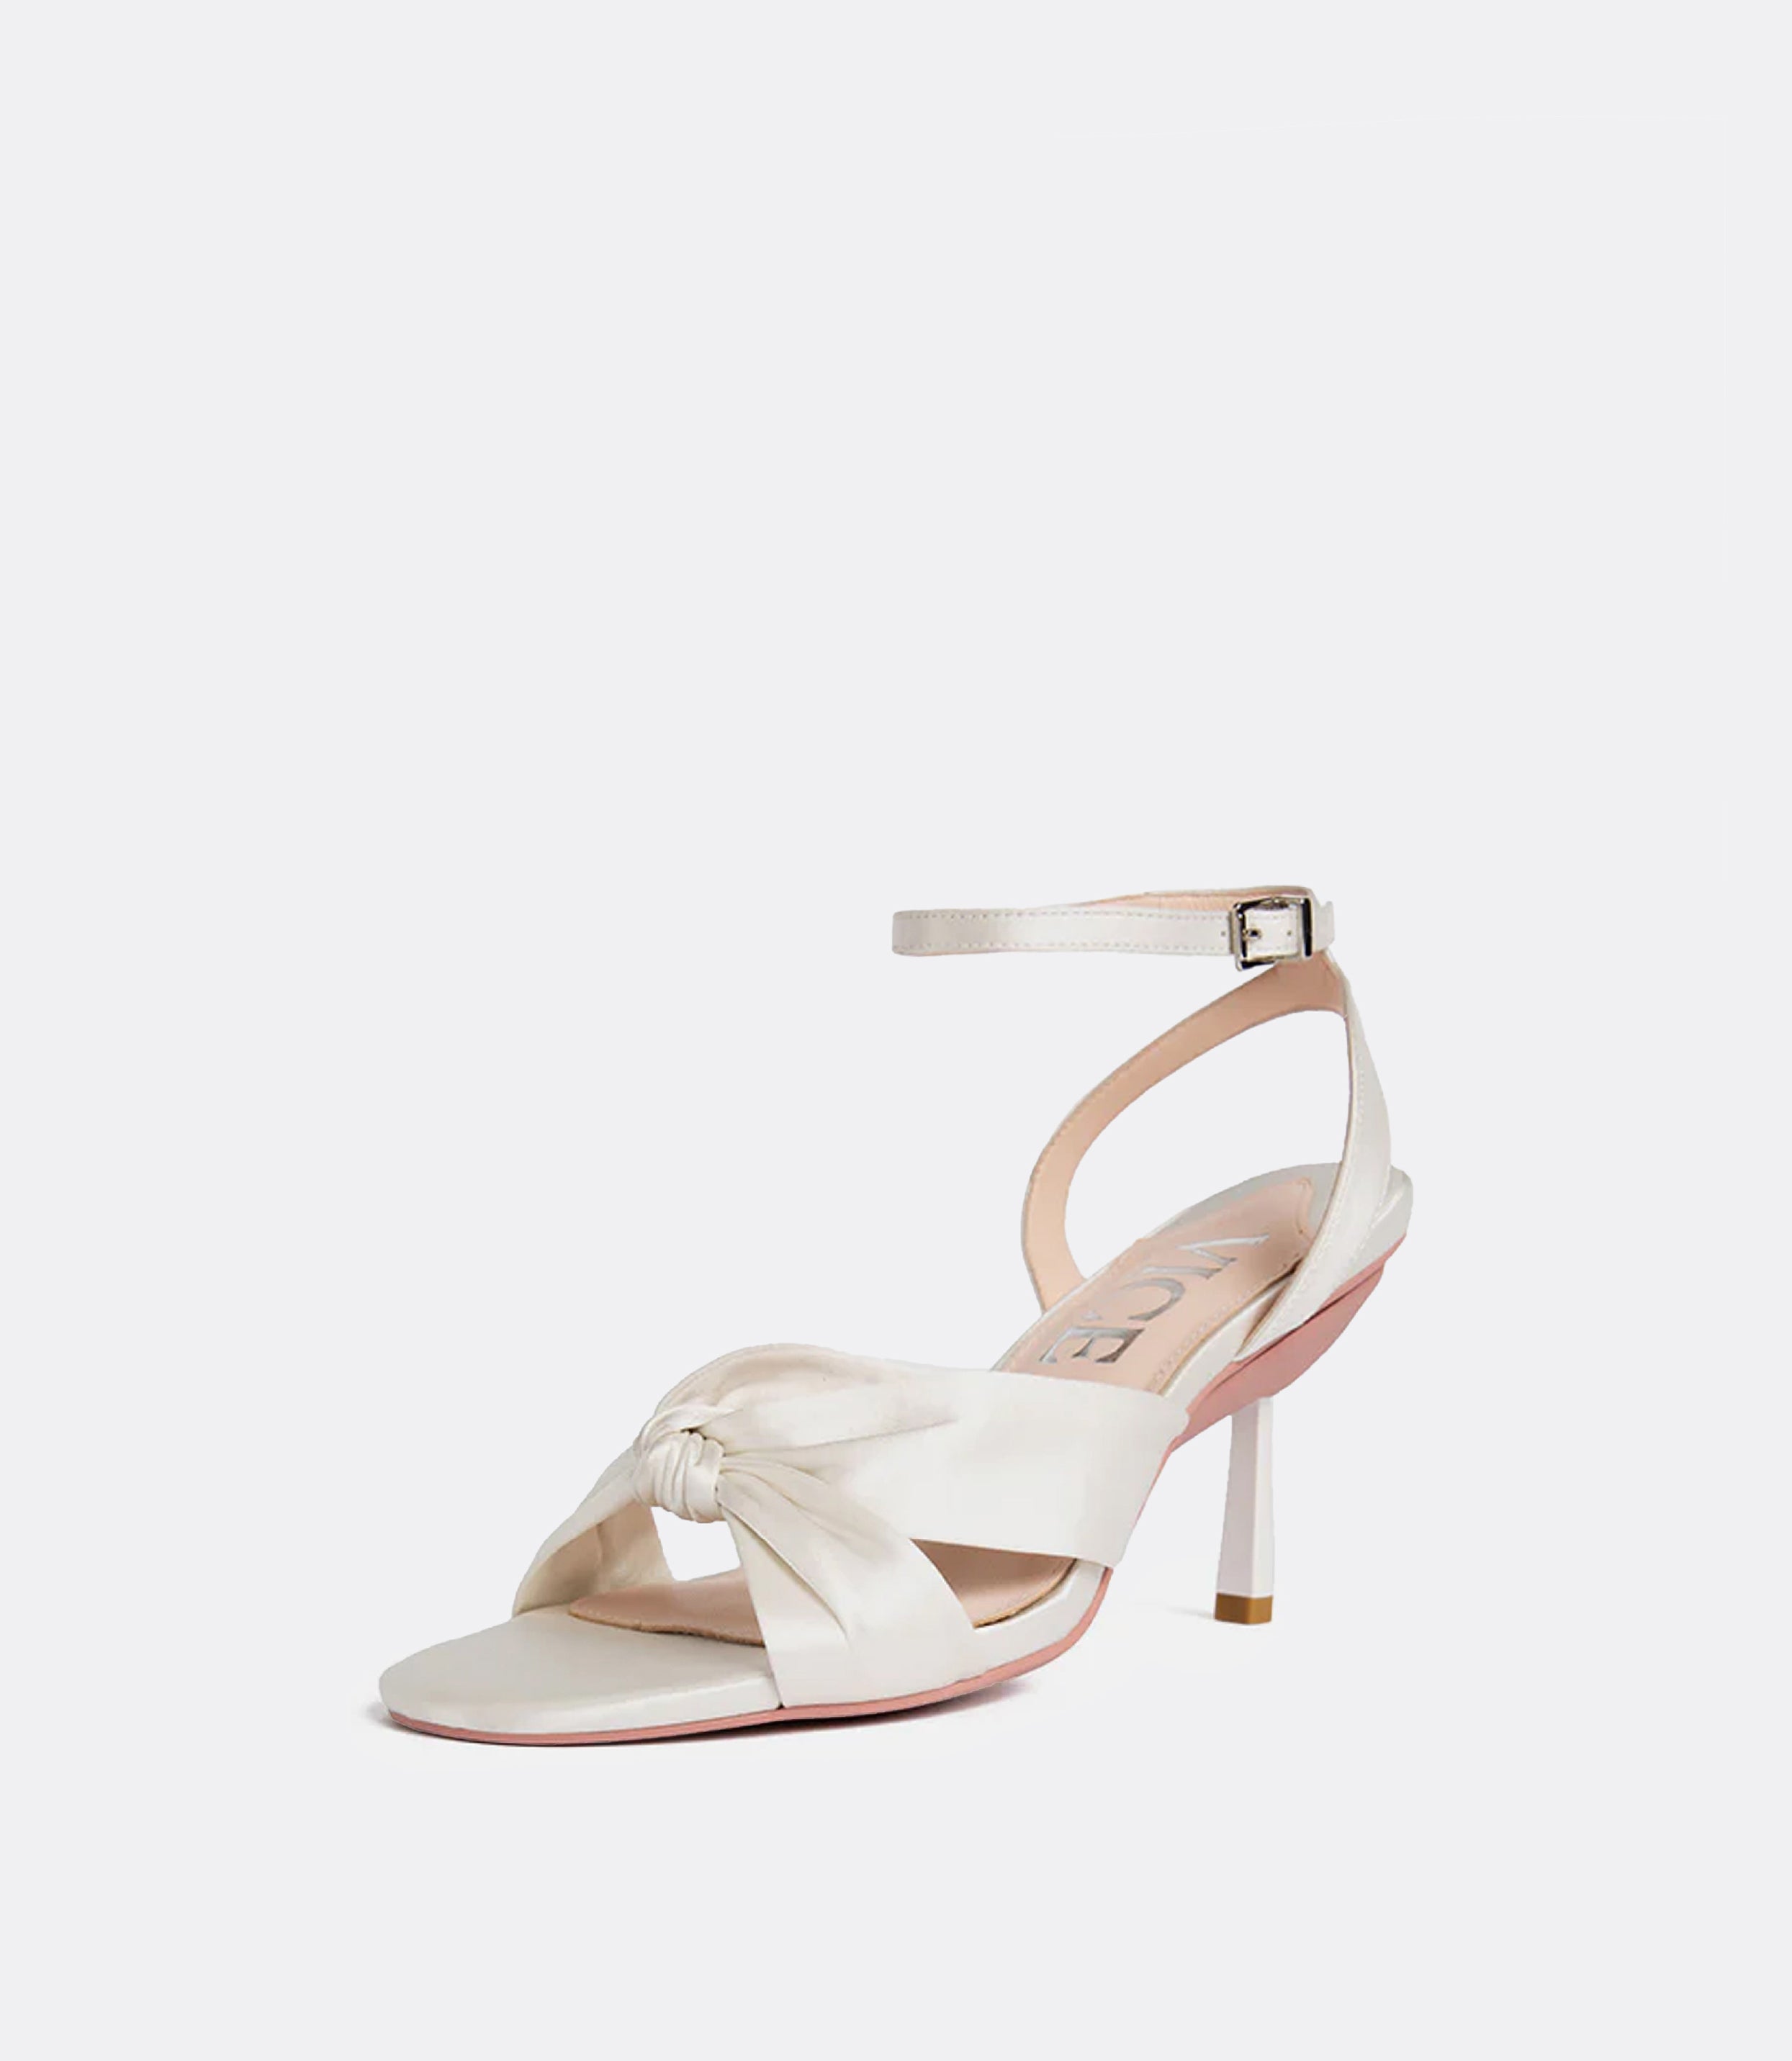 Front view of a white silk sandal as a heel.